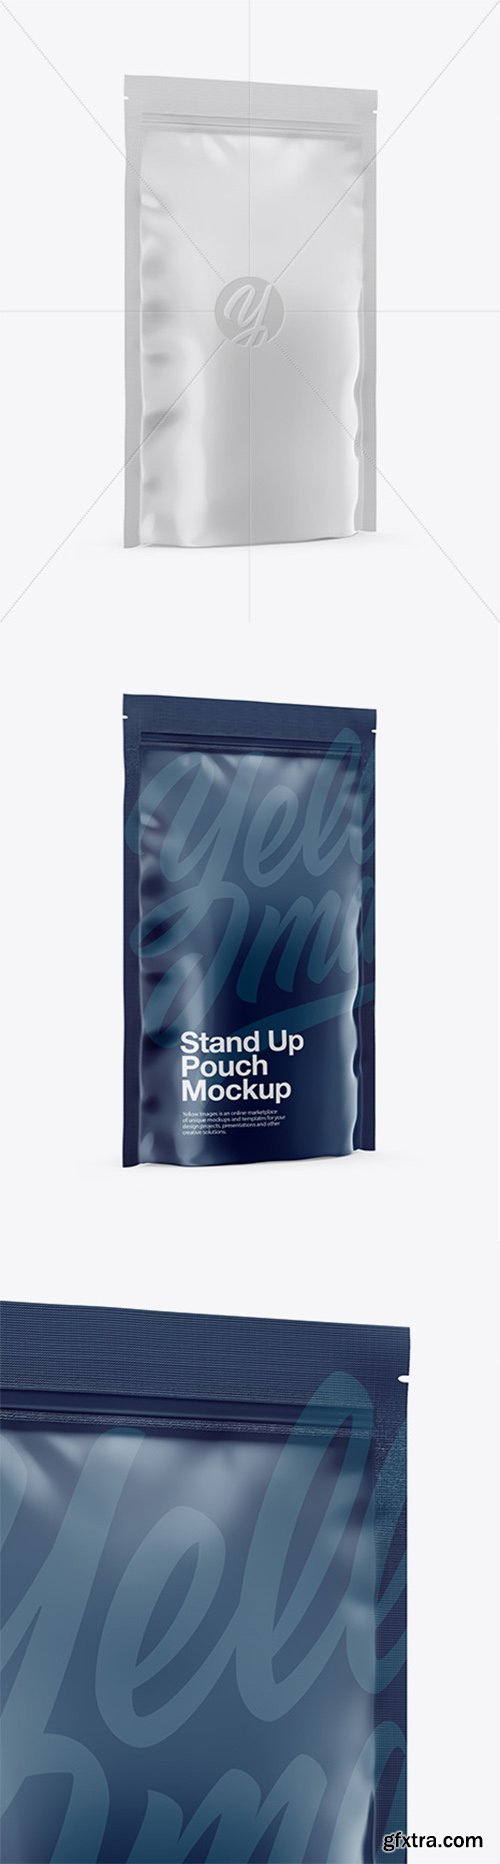 Glossy Stand-Up Pouch Mockup - Half Side View 28439